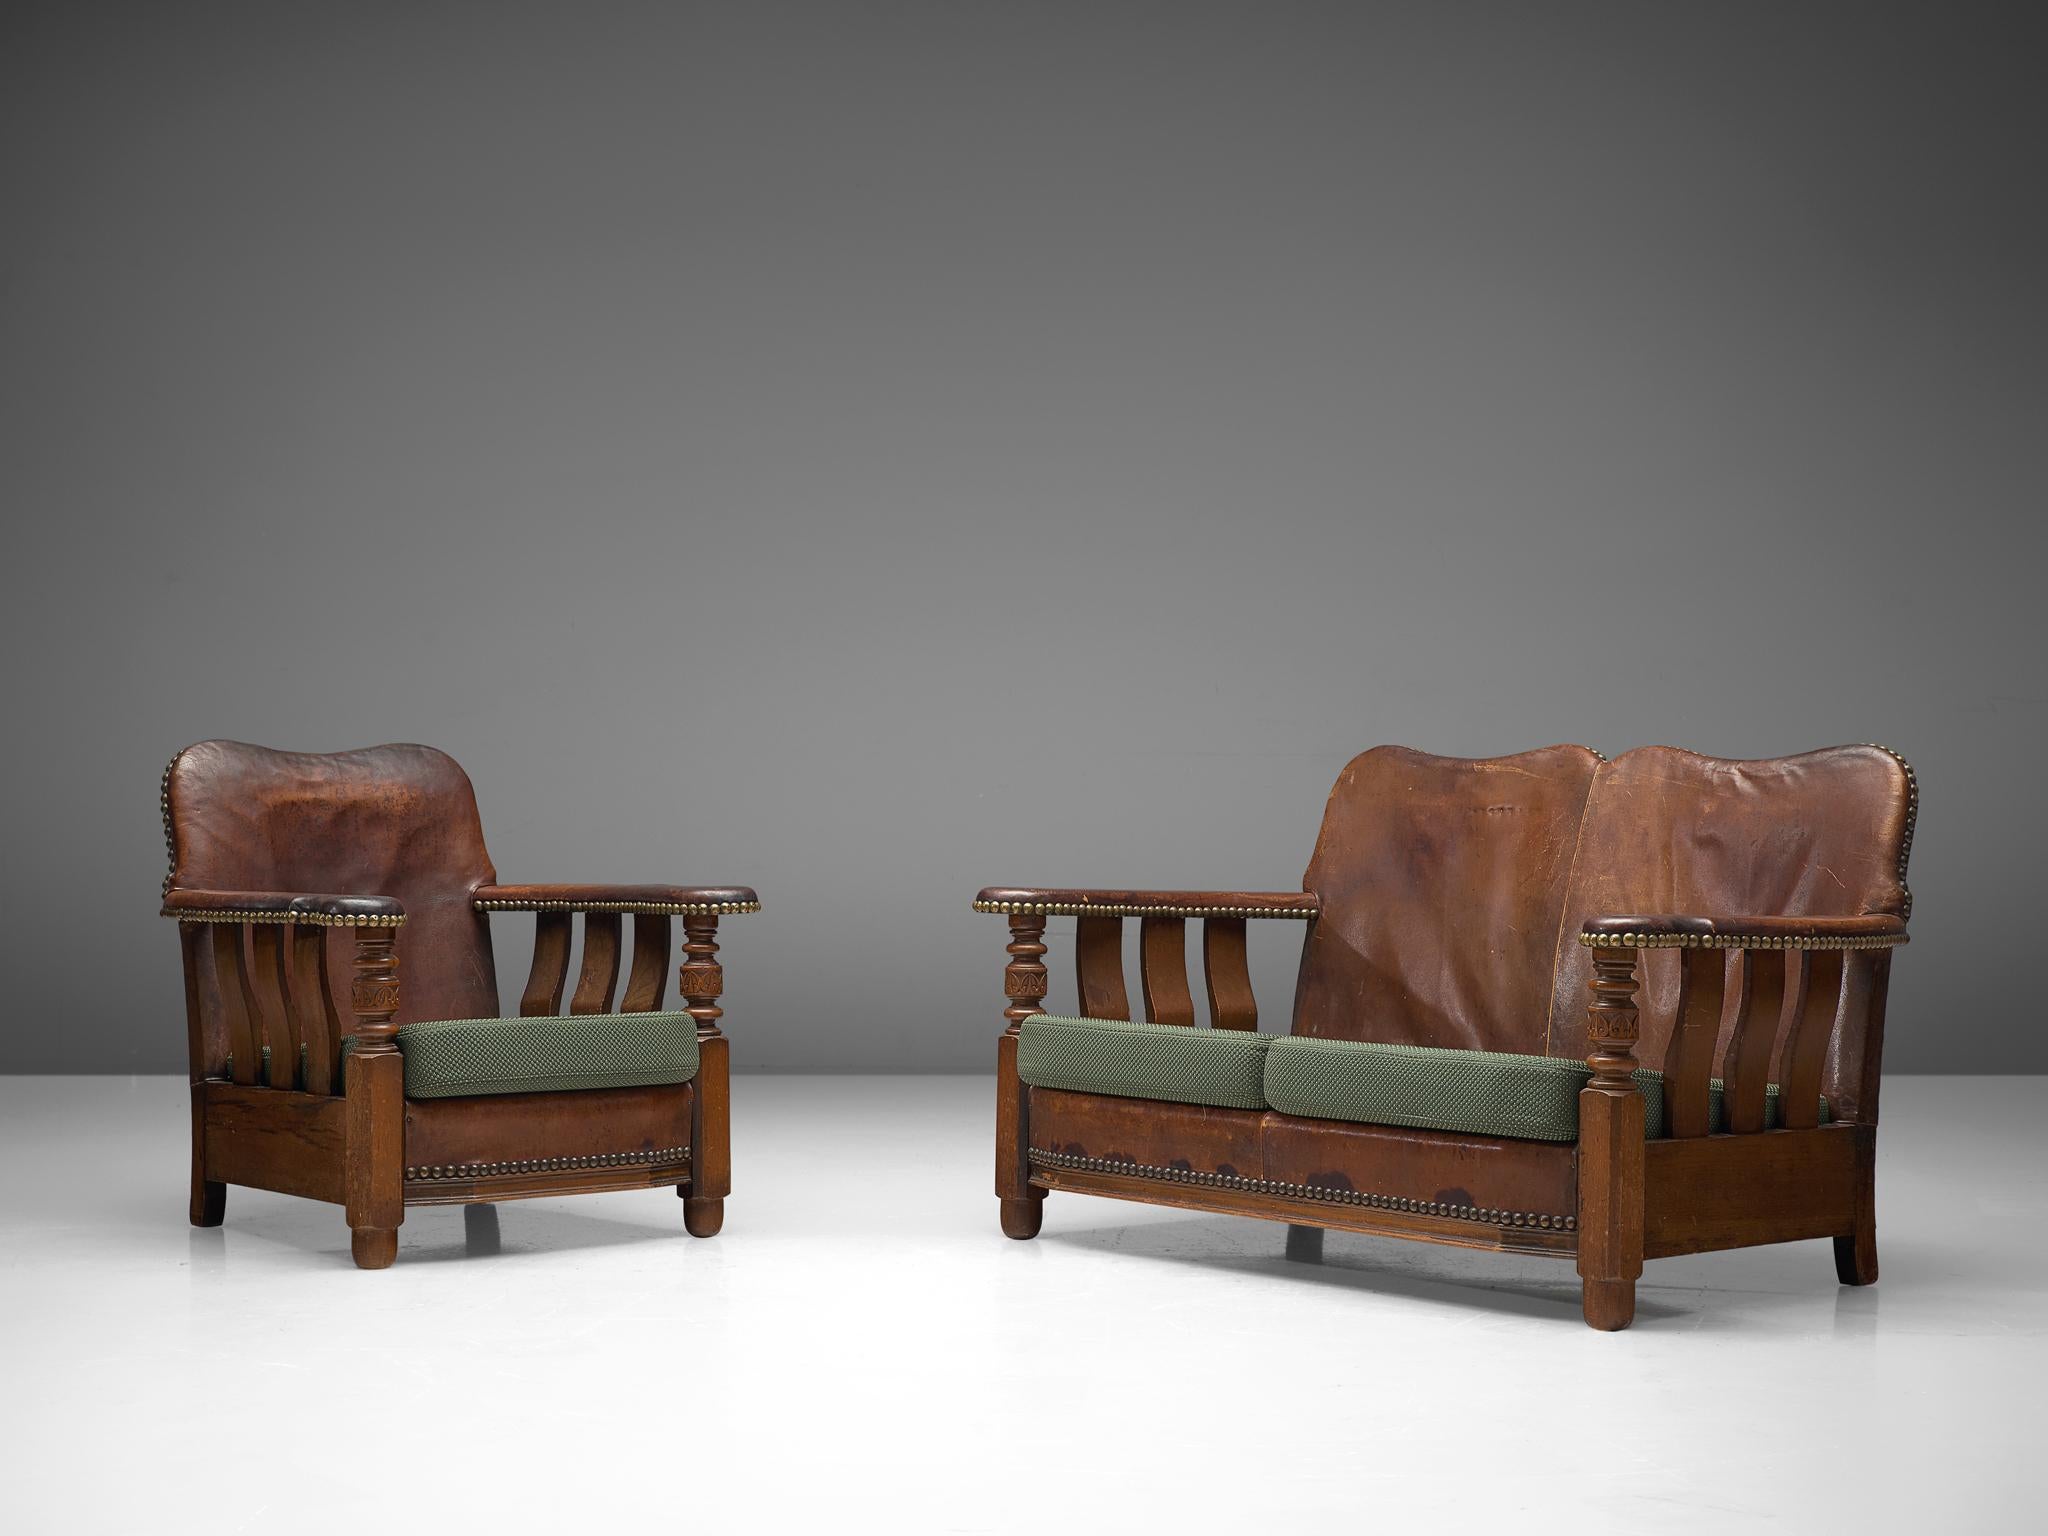 Settee sofa and lounge chair, wood, leather and fabric, Denmark, 1920s.

Exceptional example of early Danish design are this settee and lounge chair with robust, bulky aesthetics. The frames of these pieces are made of wood. The back and armrests